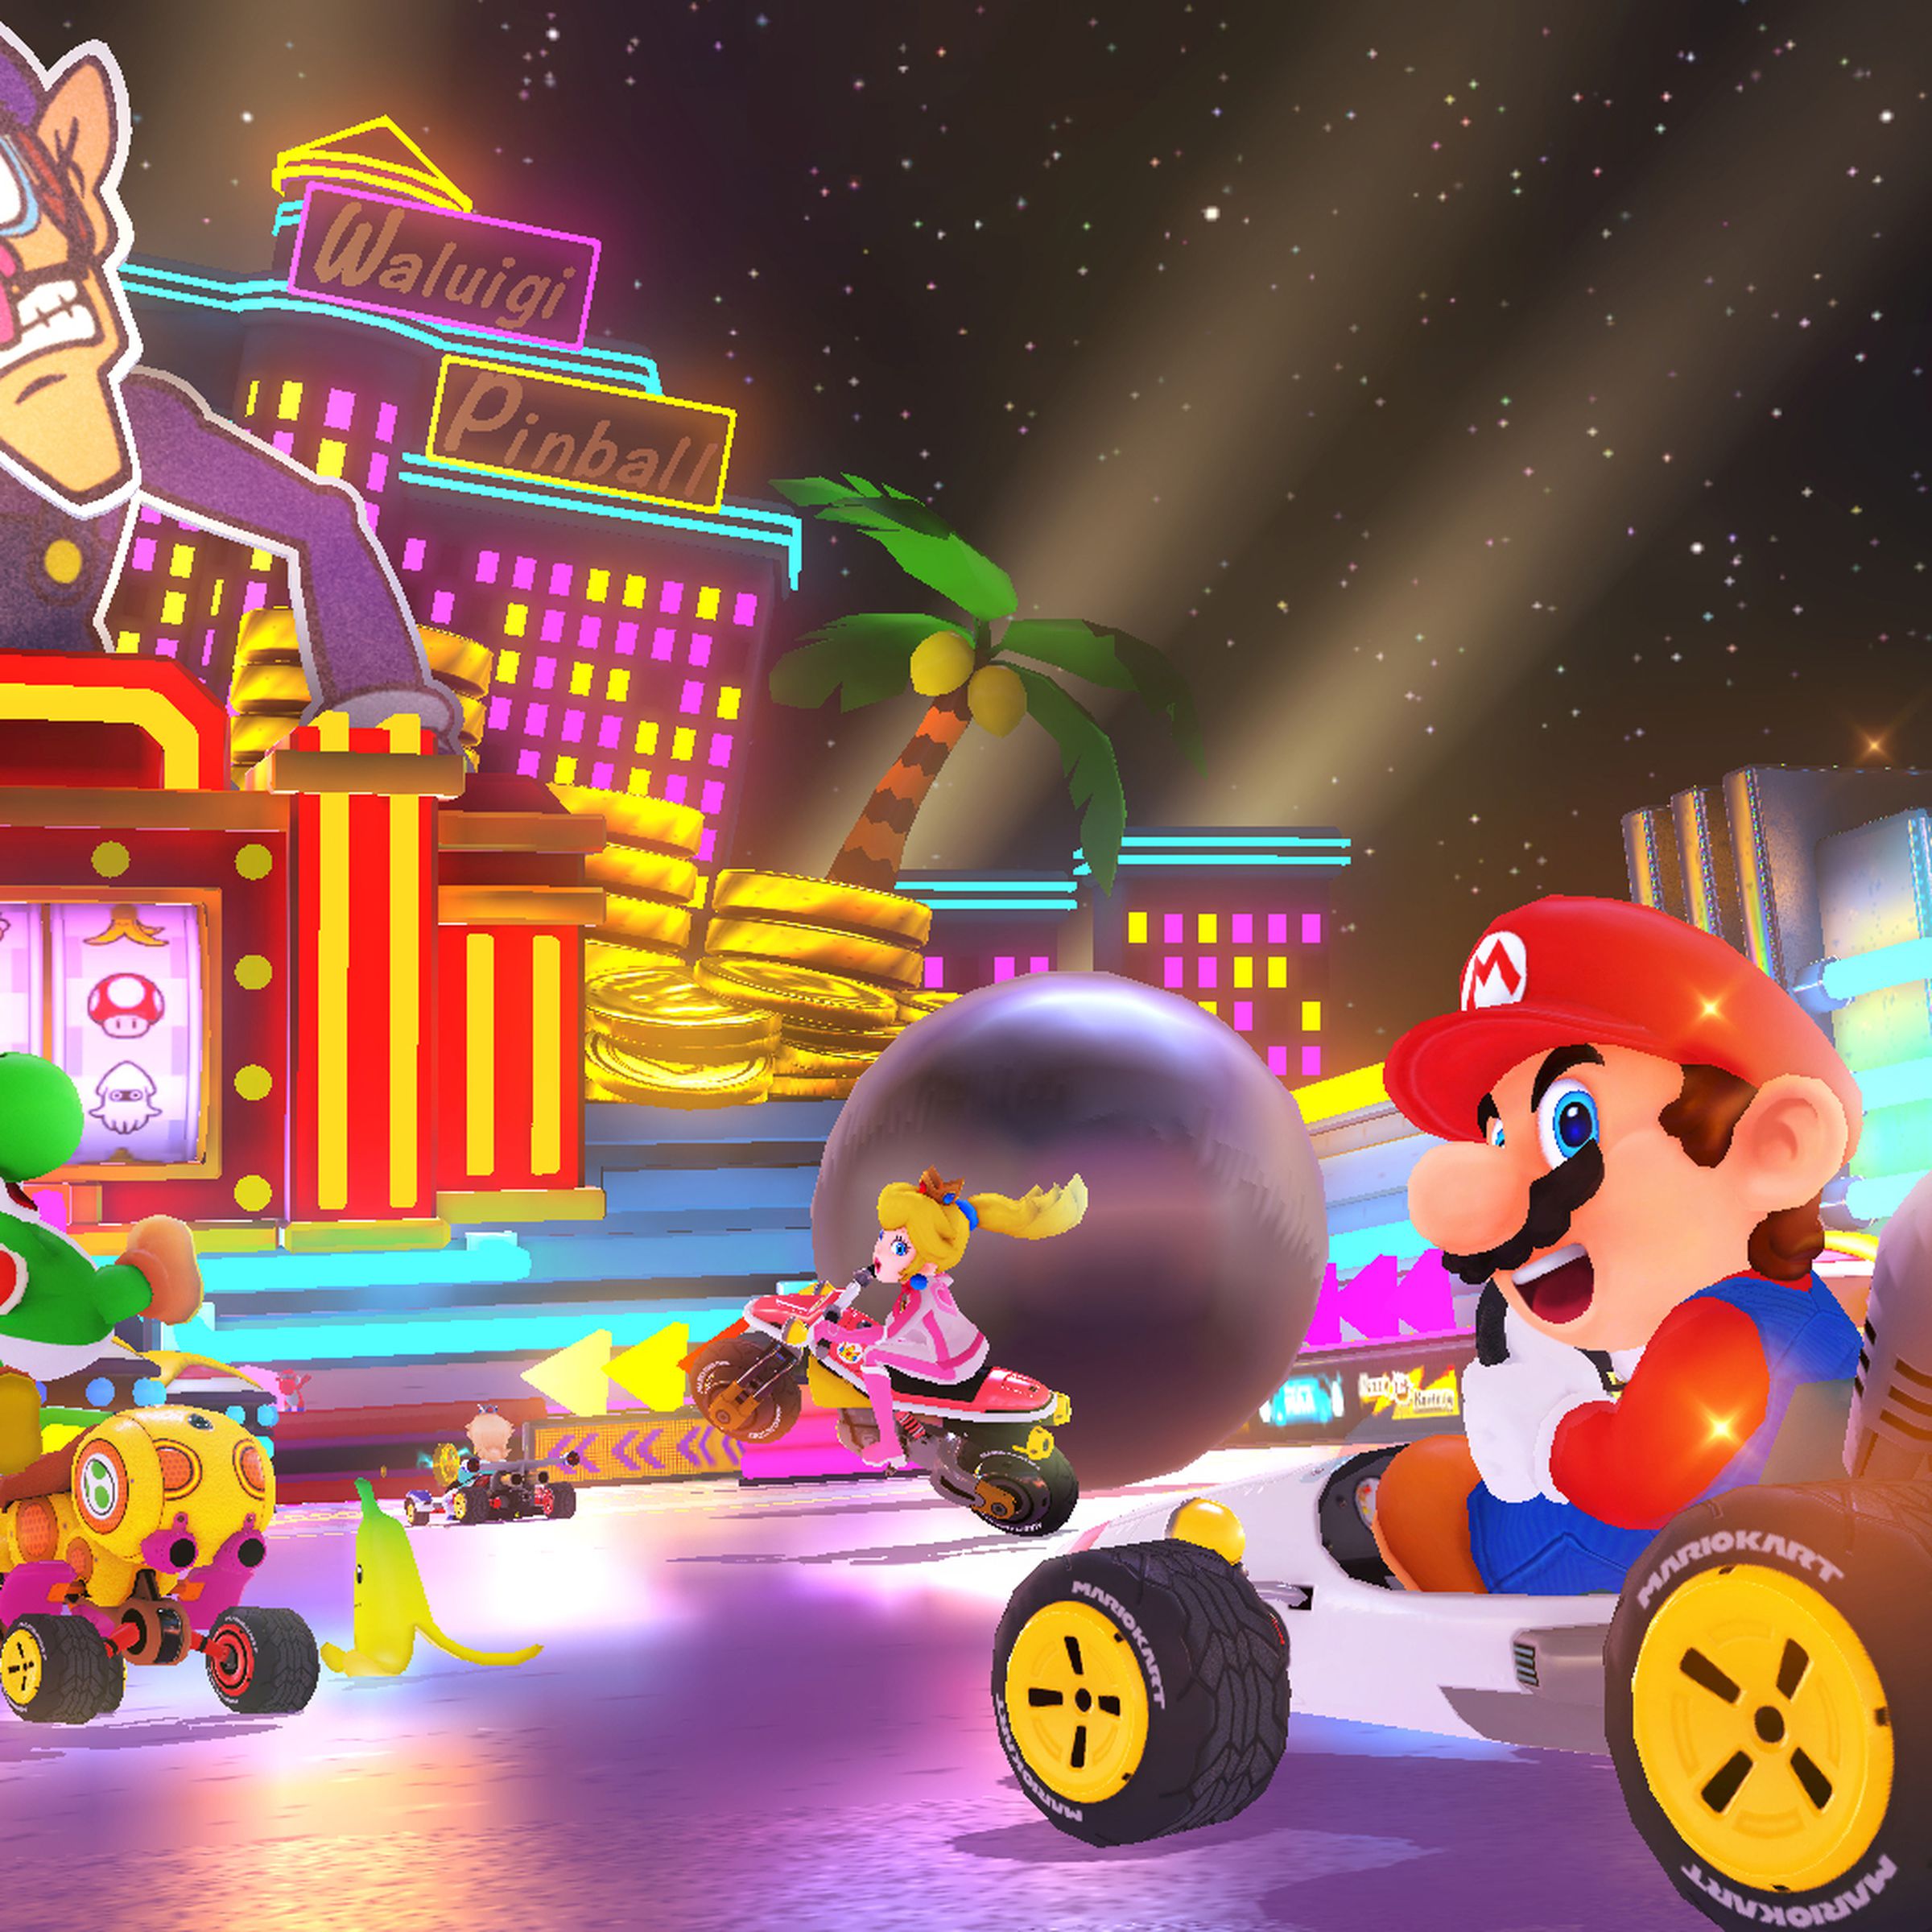 An image of Mario, Yoshi, and other Mario Kart characters driving on a course that resembles a pinball machine.